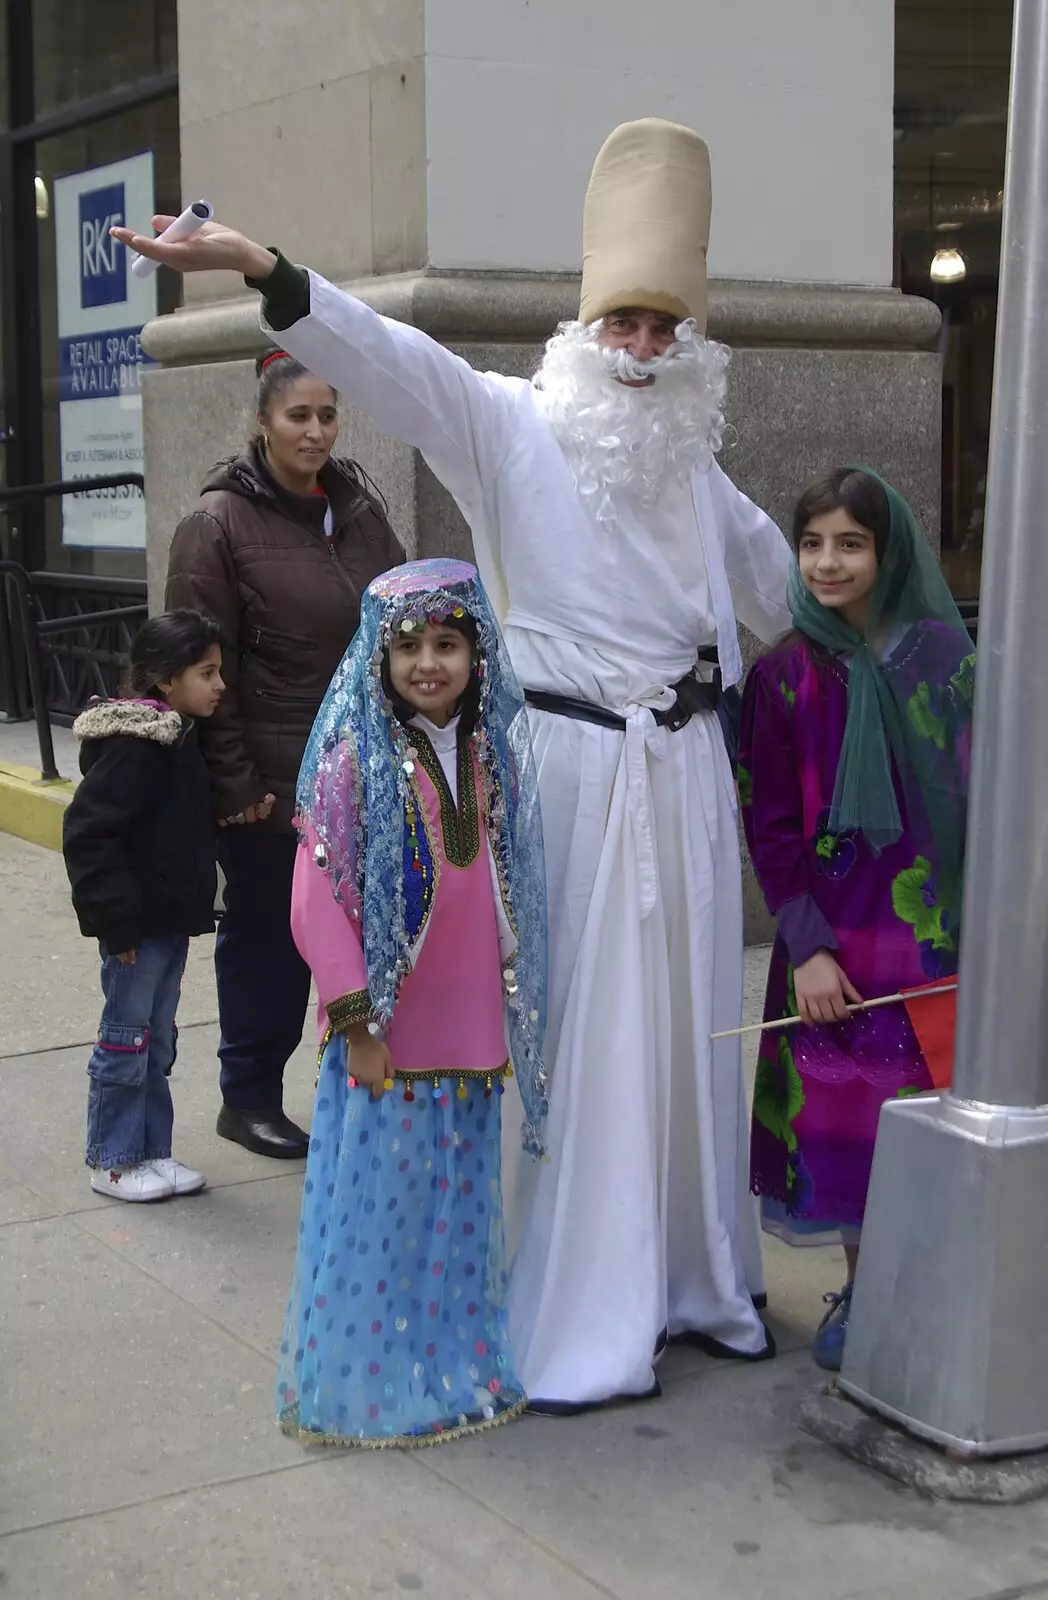 Another fake beard, from Persian Day Parade, Upper East Side and Midtown, New York, US - 25th March 2007